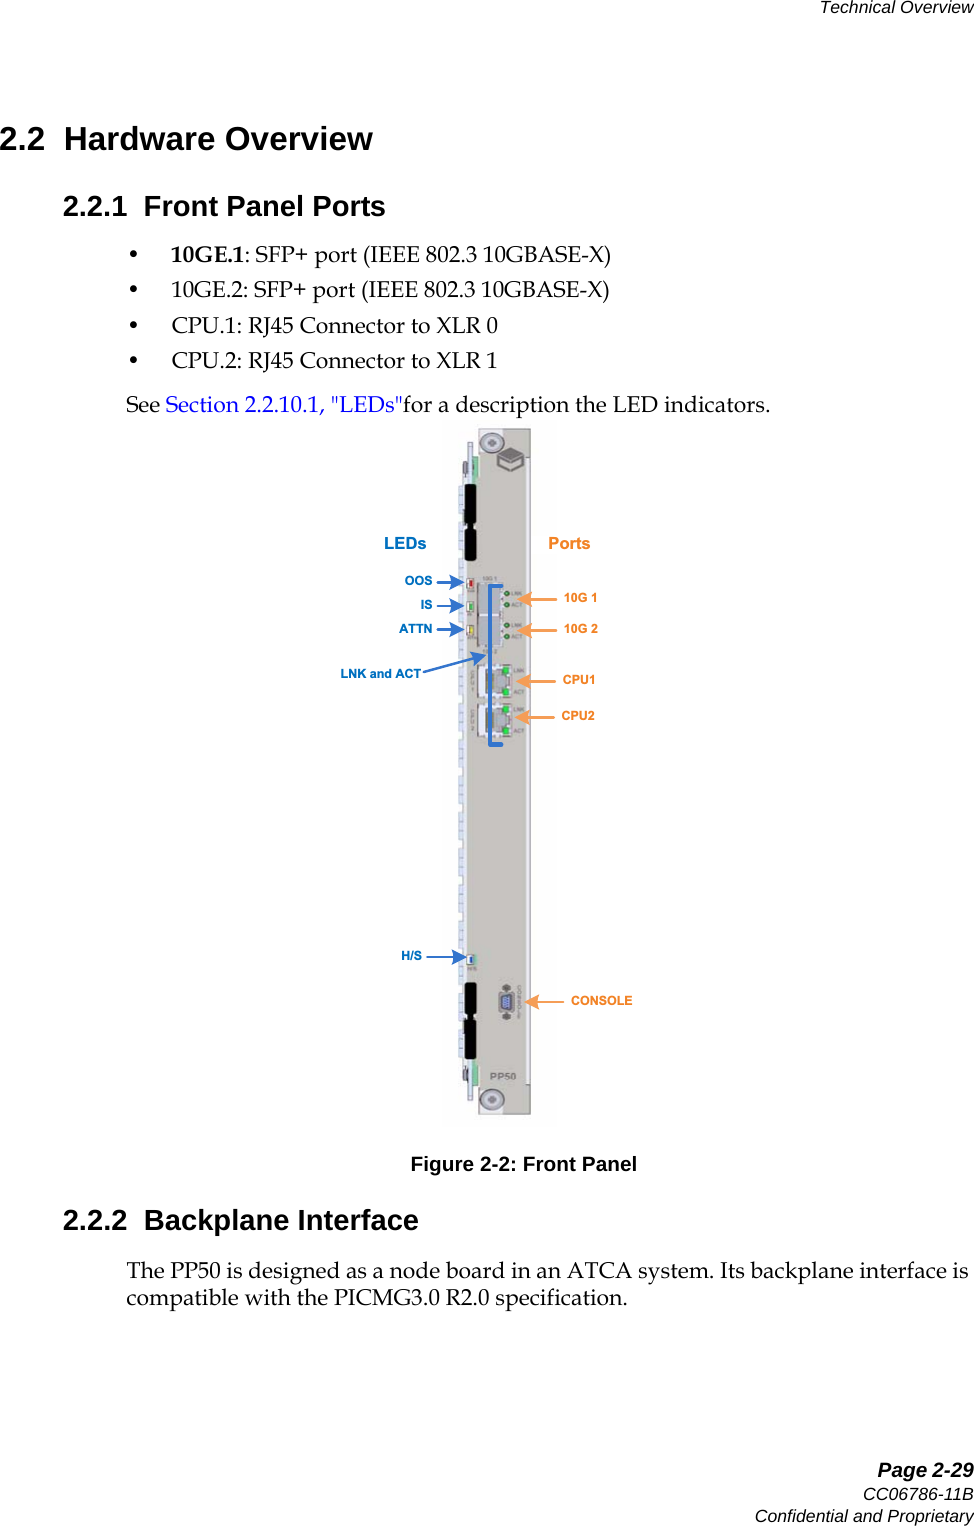   Page 2-29CC06786-11BConfidential and ProprietaryTechnical Overview14ABABPreliminary2.2  Hardware Overview2.2.1  Front Panel Ports•10GE.1: SFP+ port (IEEE 802.3 10GBASE-X)• 10GE.2: SFP+ port (IEEE 802.3 10GBASE-X)• CPU.1: RJ45 Connector to XLR 0• CPU.2: RJ45 Connector to XLR 1See Section2.2.10.1, &quot;LEDs&quot;for a description the LED indicators.Figure 2-2: Front Panel2.2.2  Backplane InterfaceThe PP50 is designed as a node board in an ATCA system. Its backplane interface is compatible with the PICMG3.0 R2.0 specification.OOSISATTNH/SLNK and ACTLEDs Ports10G 110G 2CPU1CPU2CONSOLE